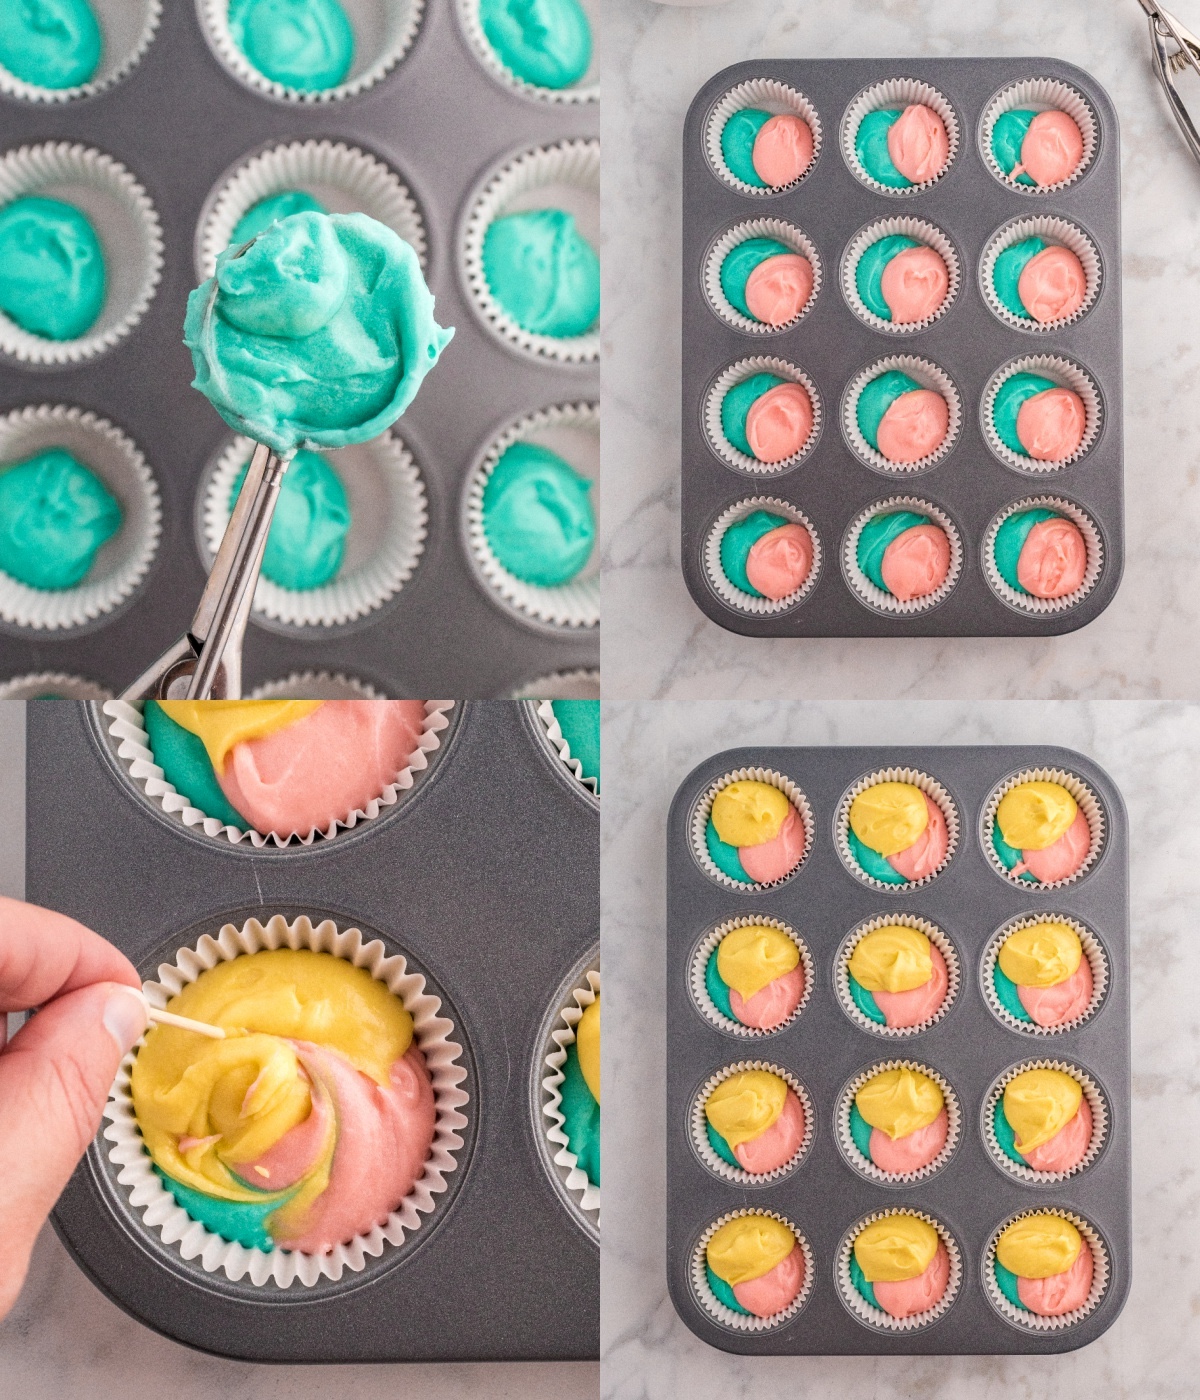 Adding the cupcake batter to the liners and swirling the colors